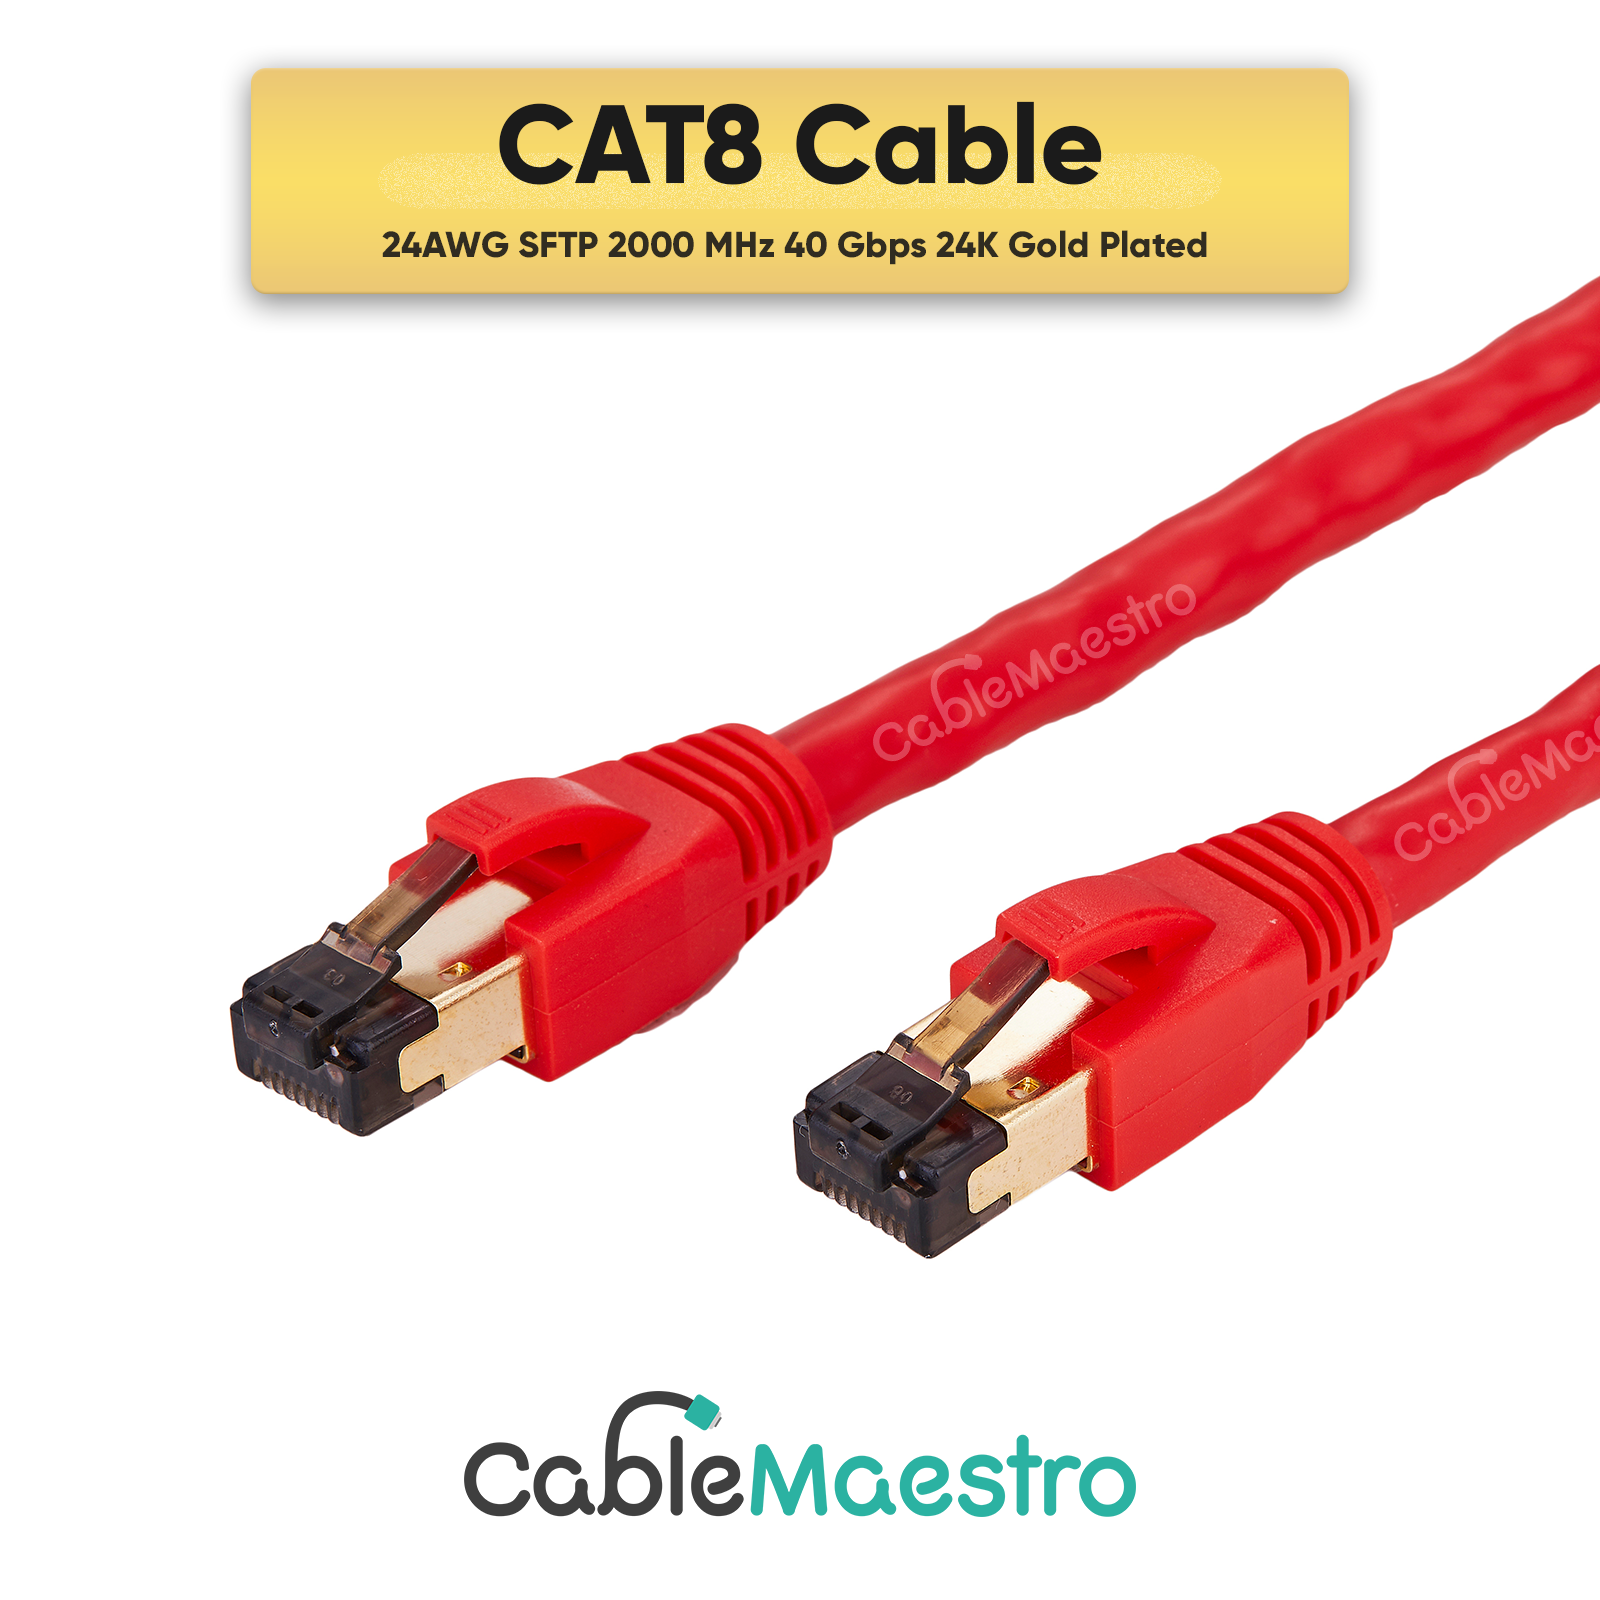 CAT8 Ethernet Cable Cord Patch Copper 26AWG SFTP Shielded RJ-45 0.5-75FT  Lot